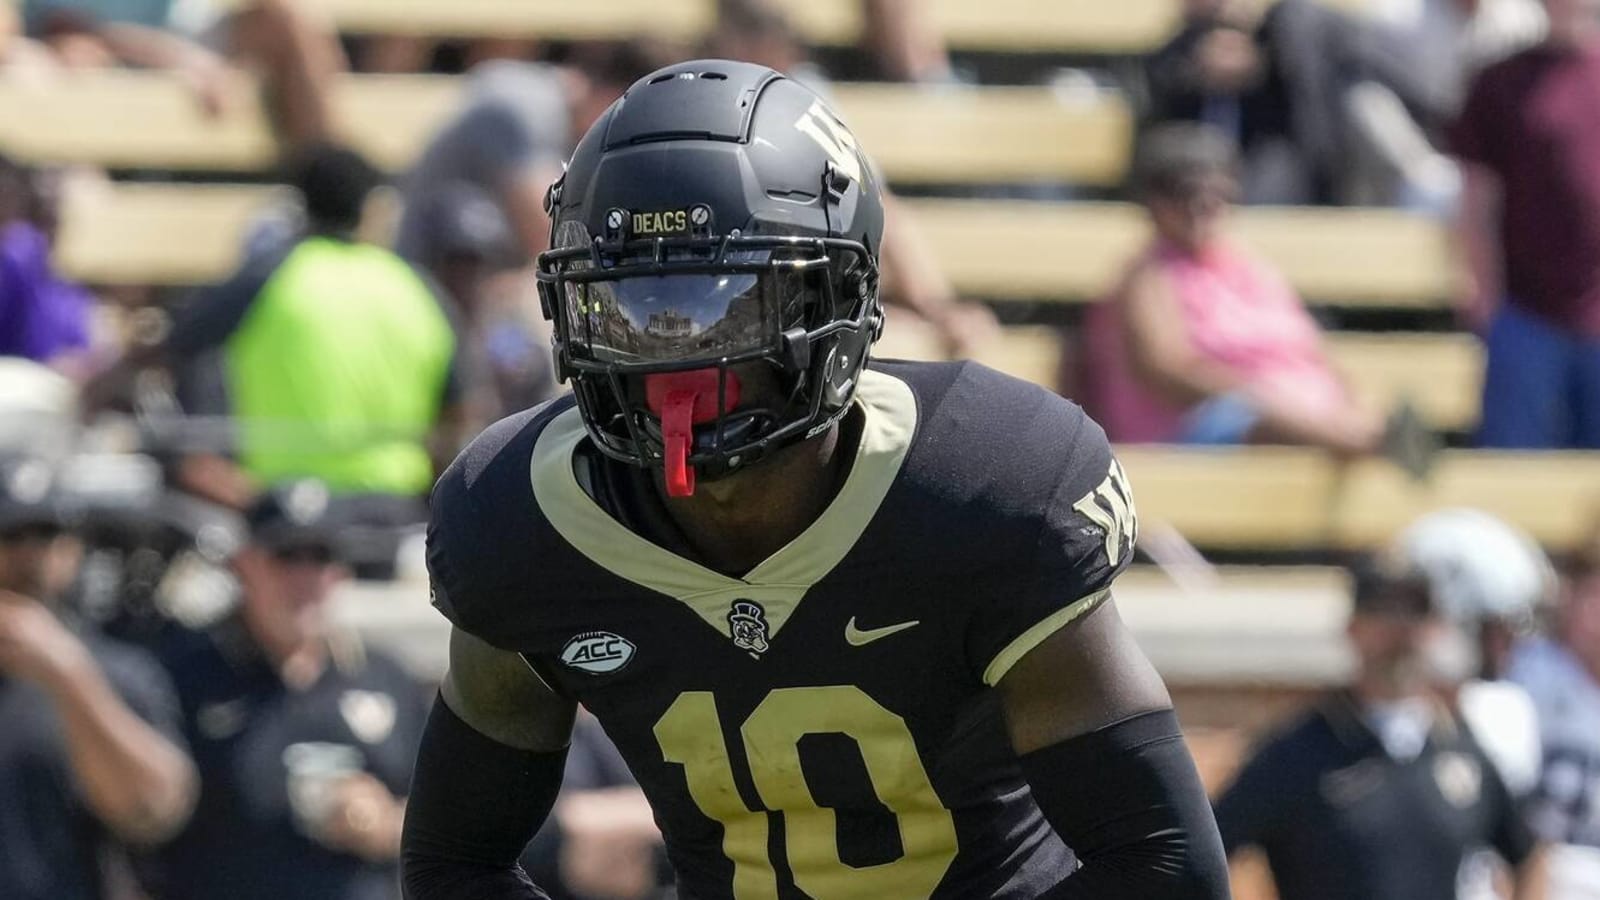 Alabama expected to land Wake Forest transfer DB, per multiple reports